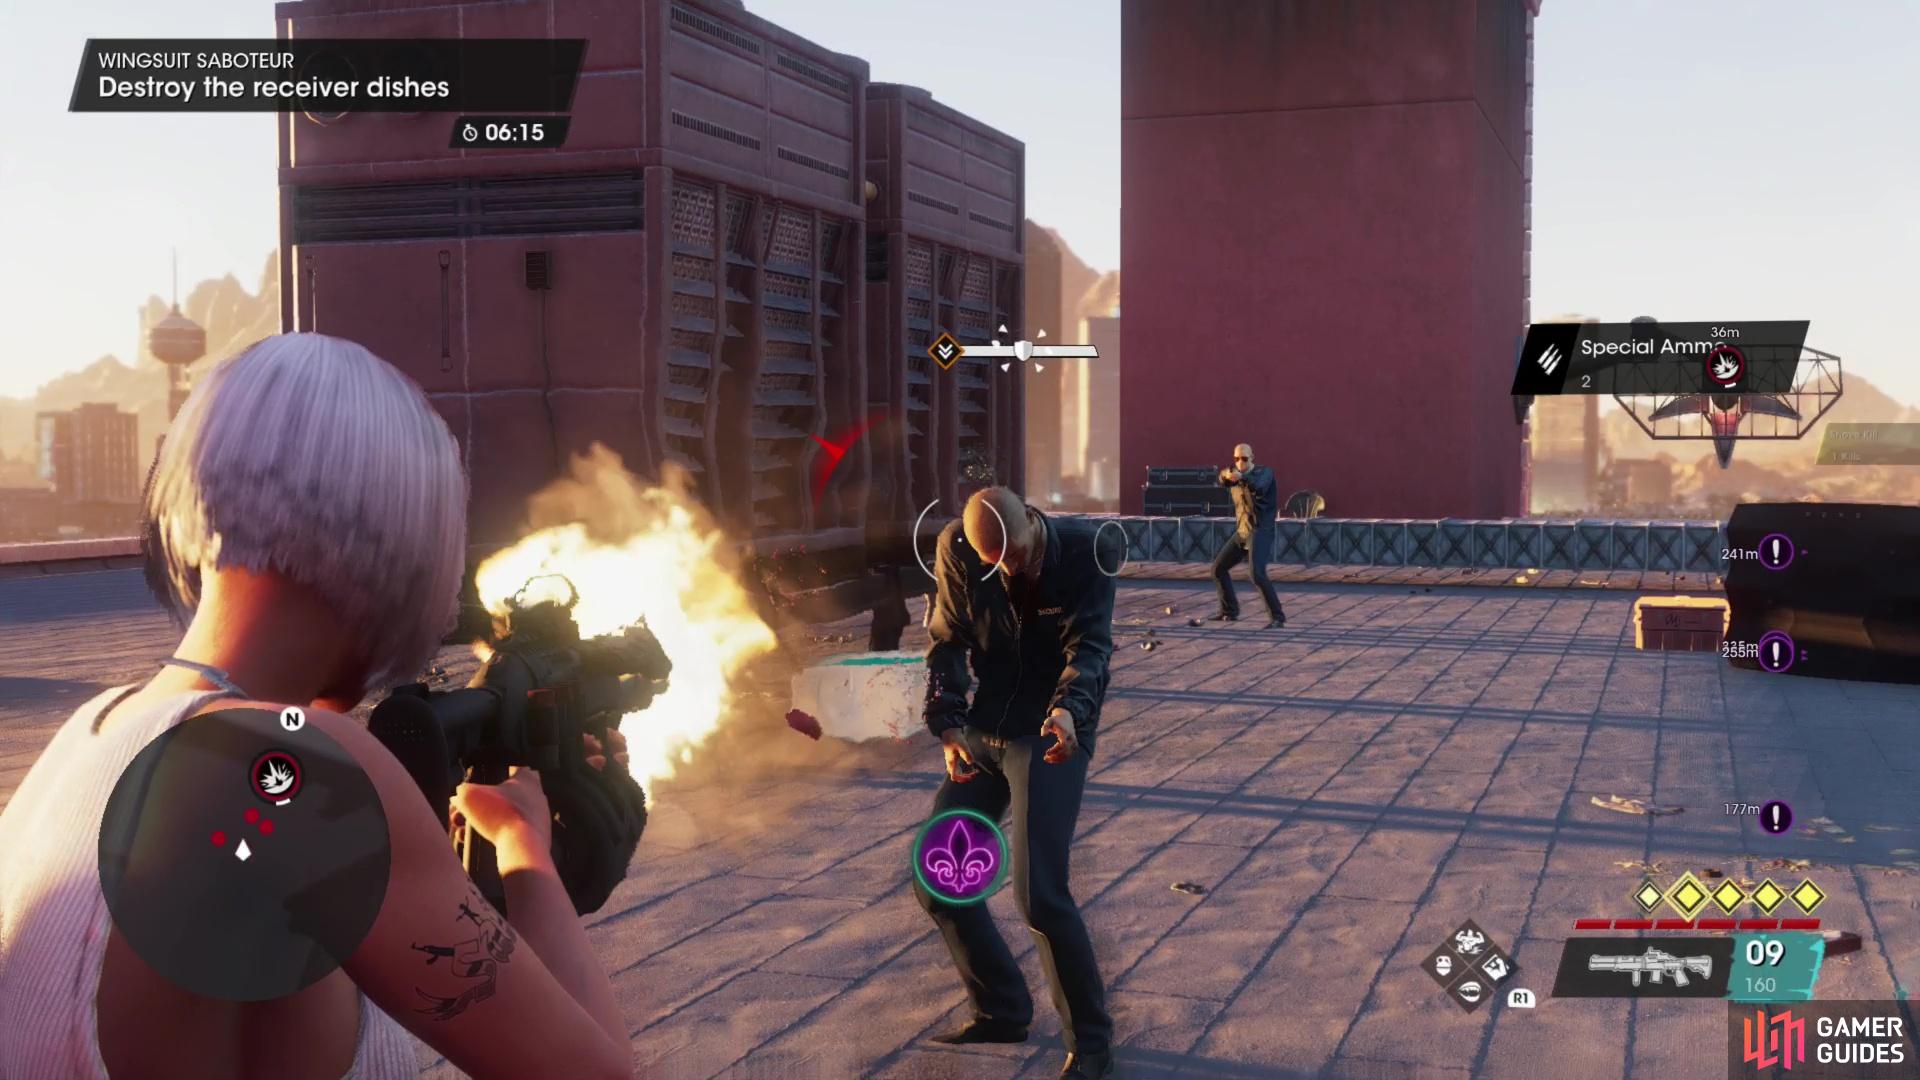 Saints Row Becomes Self Made with AccelByte